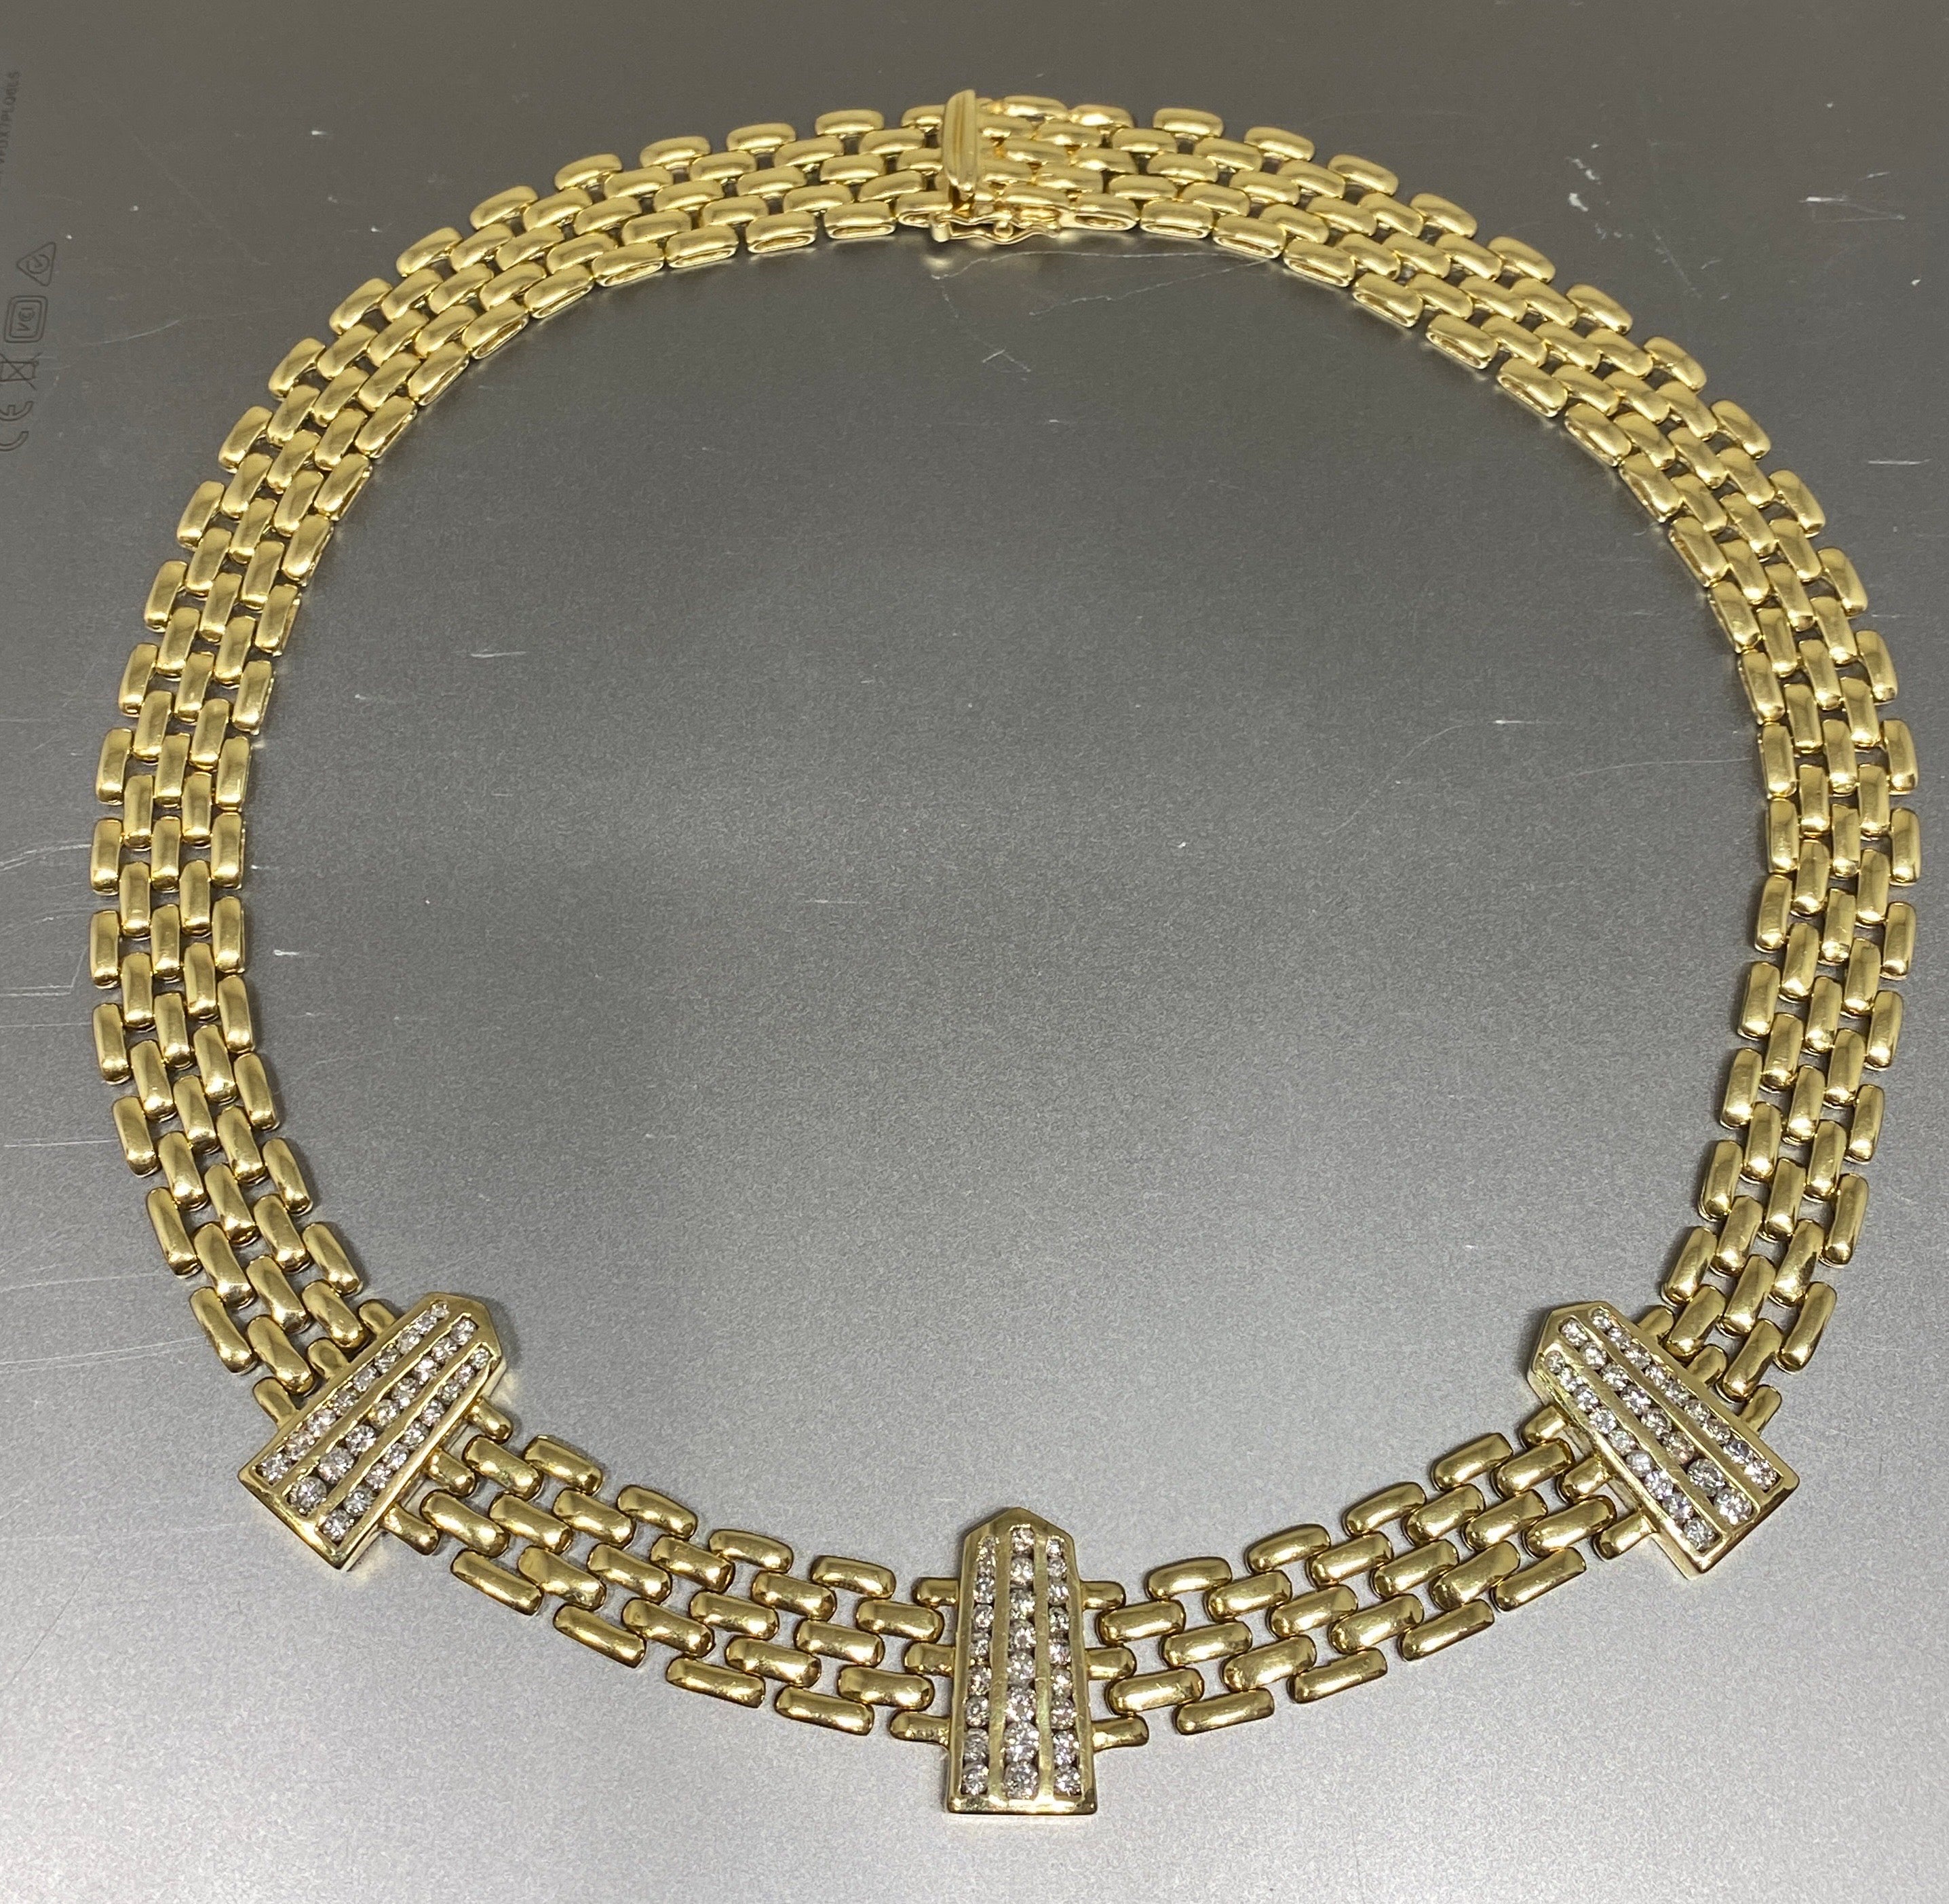 Truly a statement piece, this solid 14K yellow gold necklace will turn heads on any occasion.  This substantial necklace featured a wide woven panther link stationed with three bars set with rows of sparkling round brilliant cut diamonds.  It is